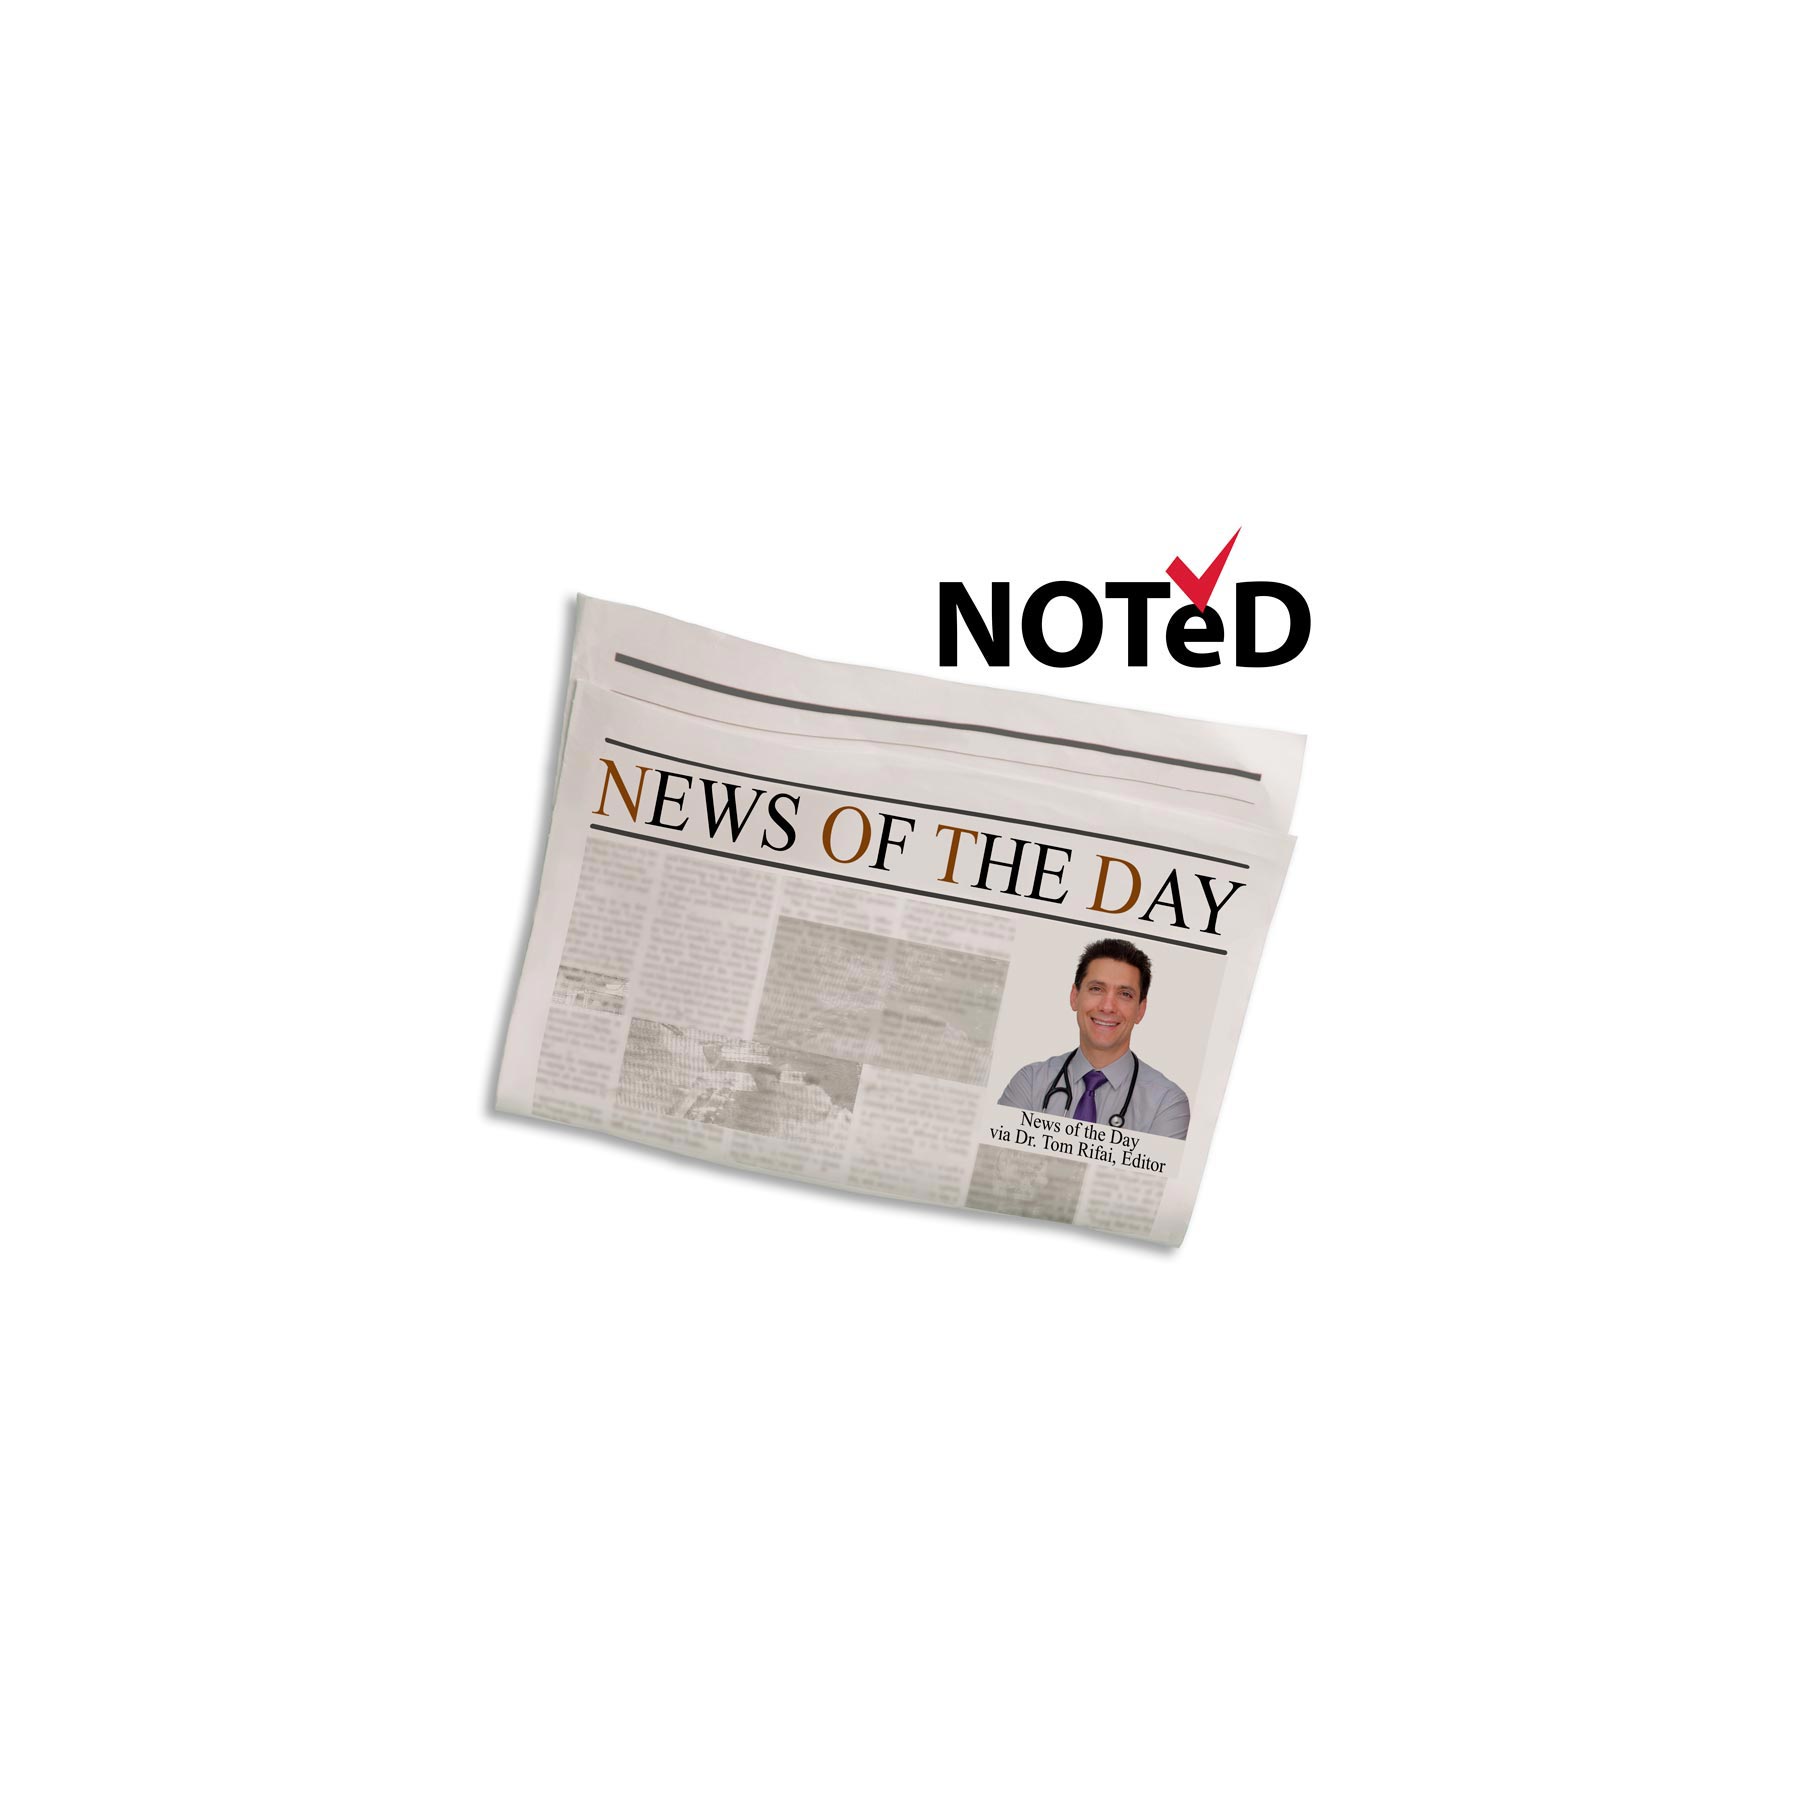 Newspaper with headline, "News of the Day," and headshot of Dr. Tom Rifai, MD, FACP